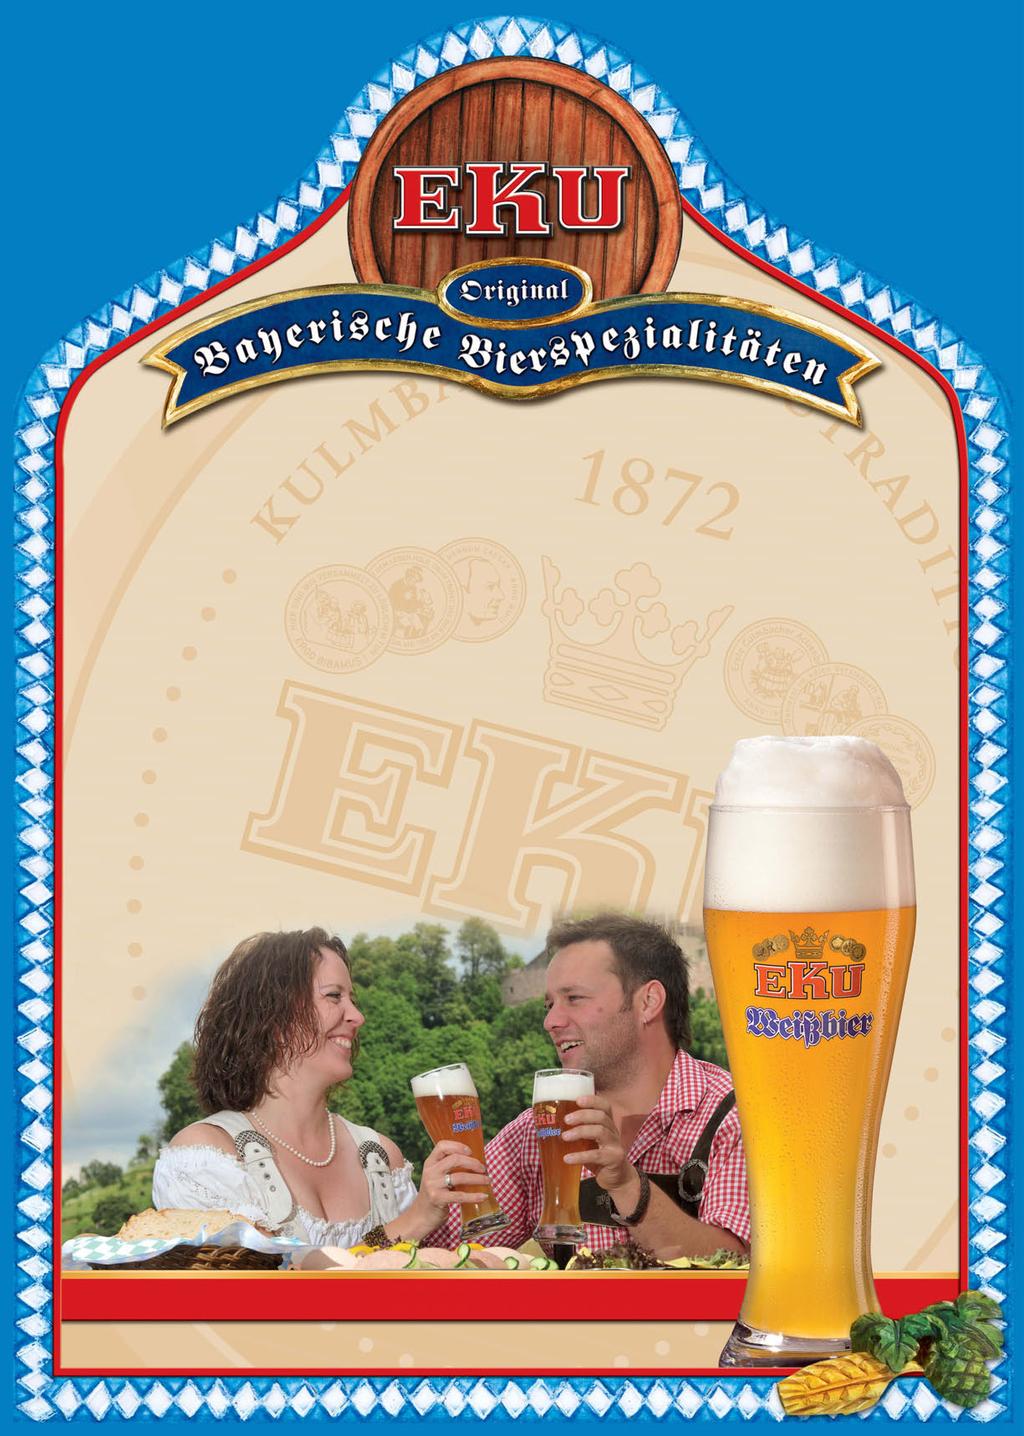 The History of EKU Wheat Beer Beginning in the 16th century, brewing of wheat beer was frequently prohibited in Bavaria.